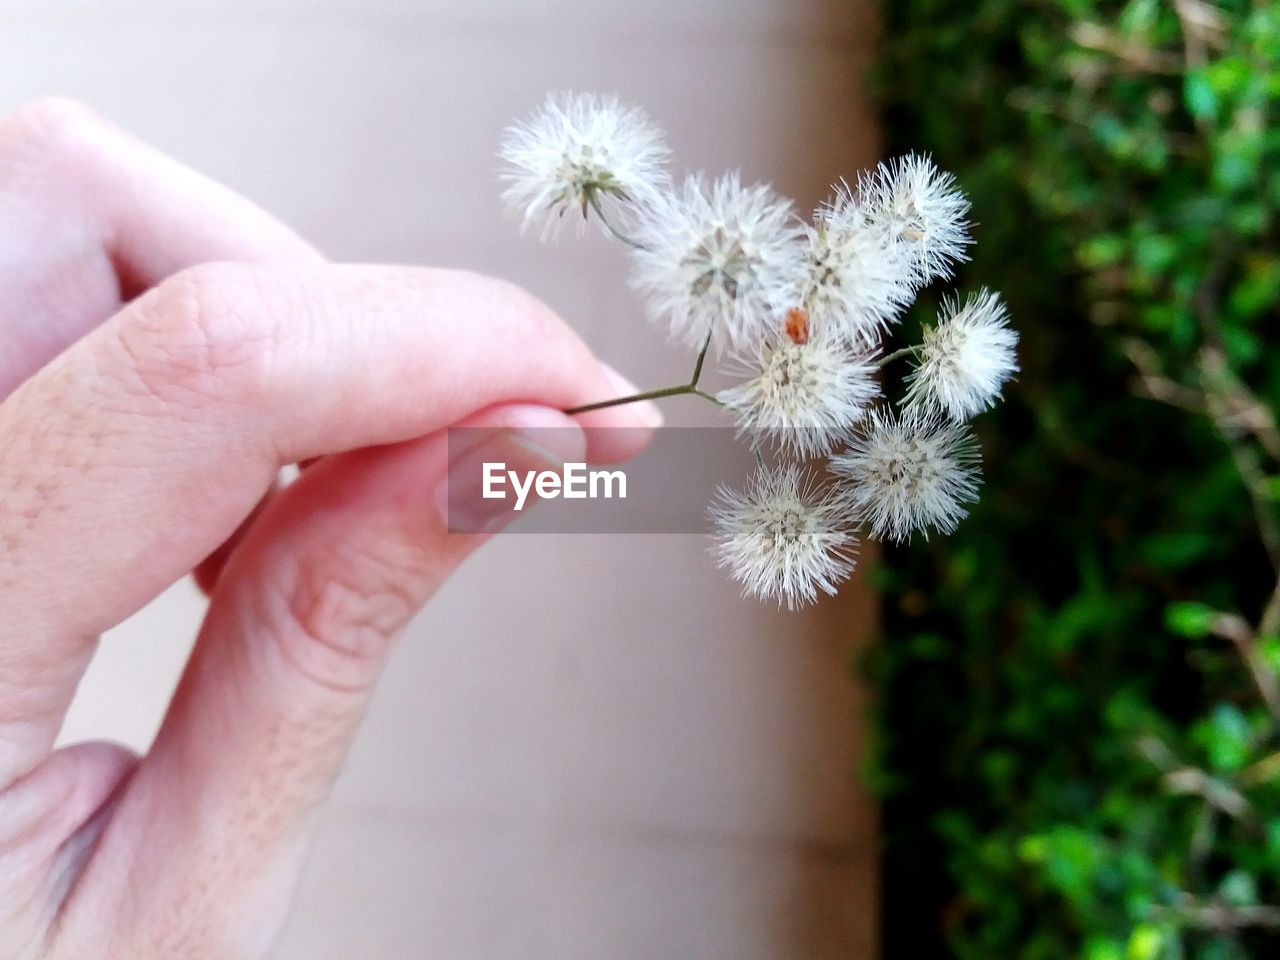 Close-up of hand holding dandelion flowers